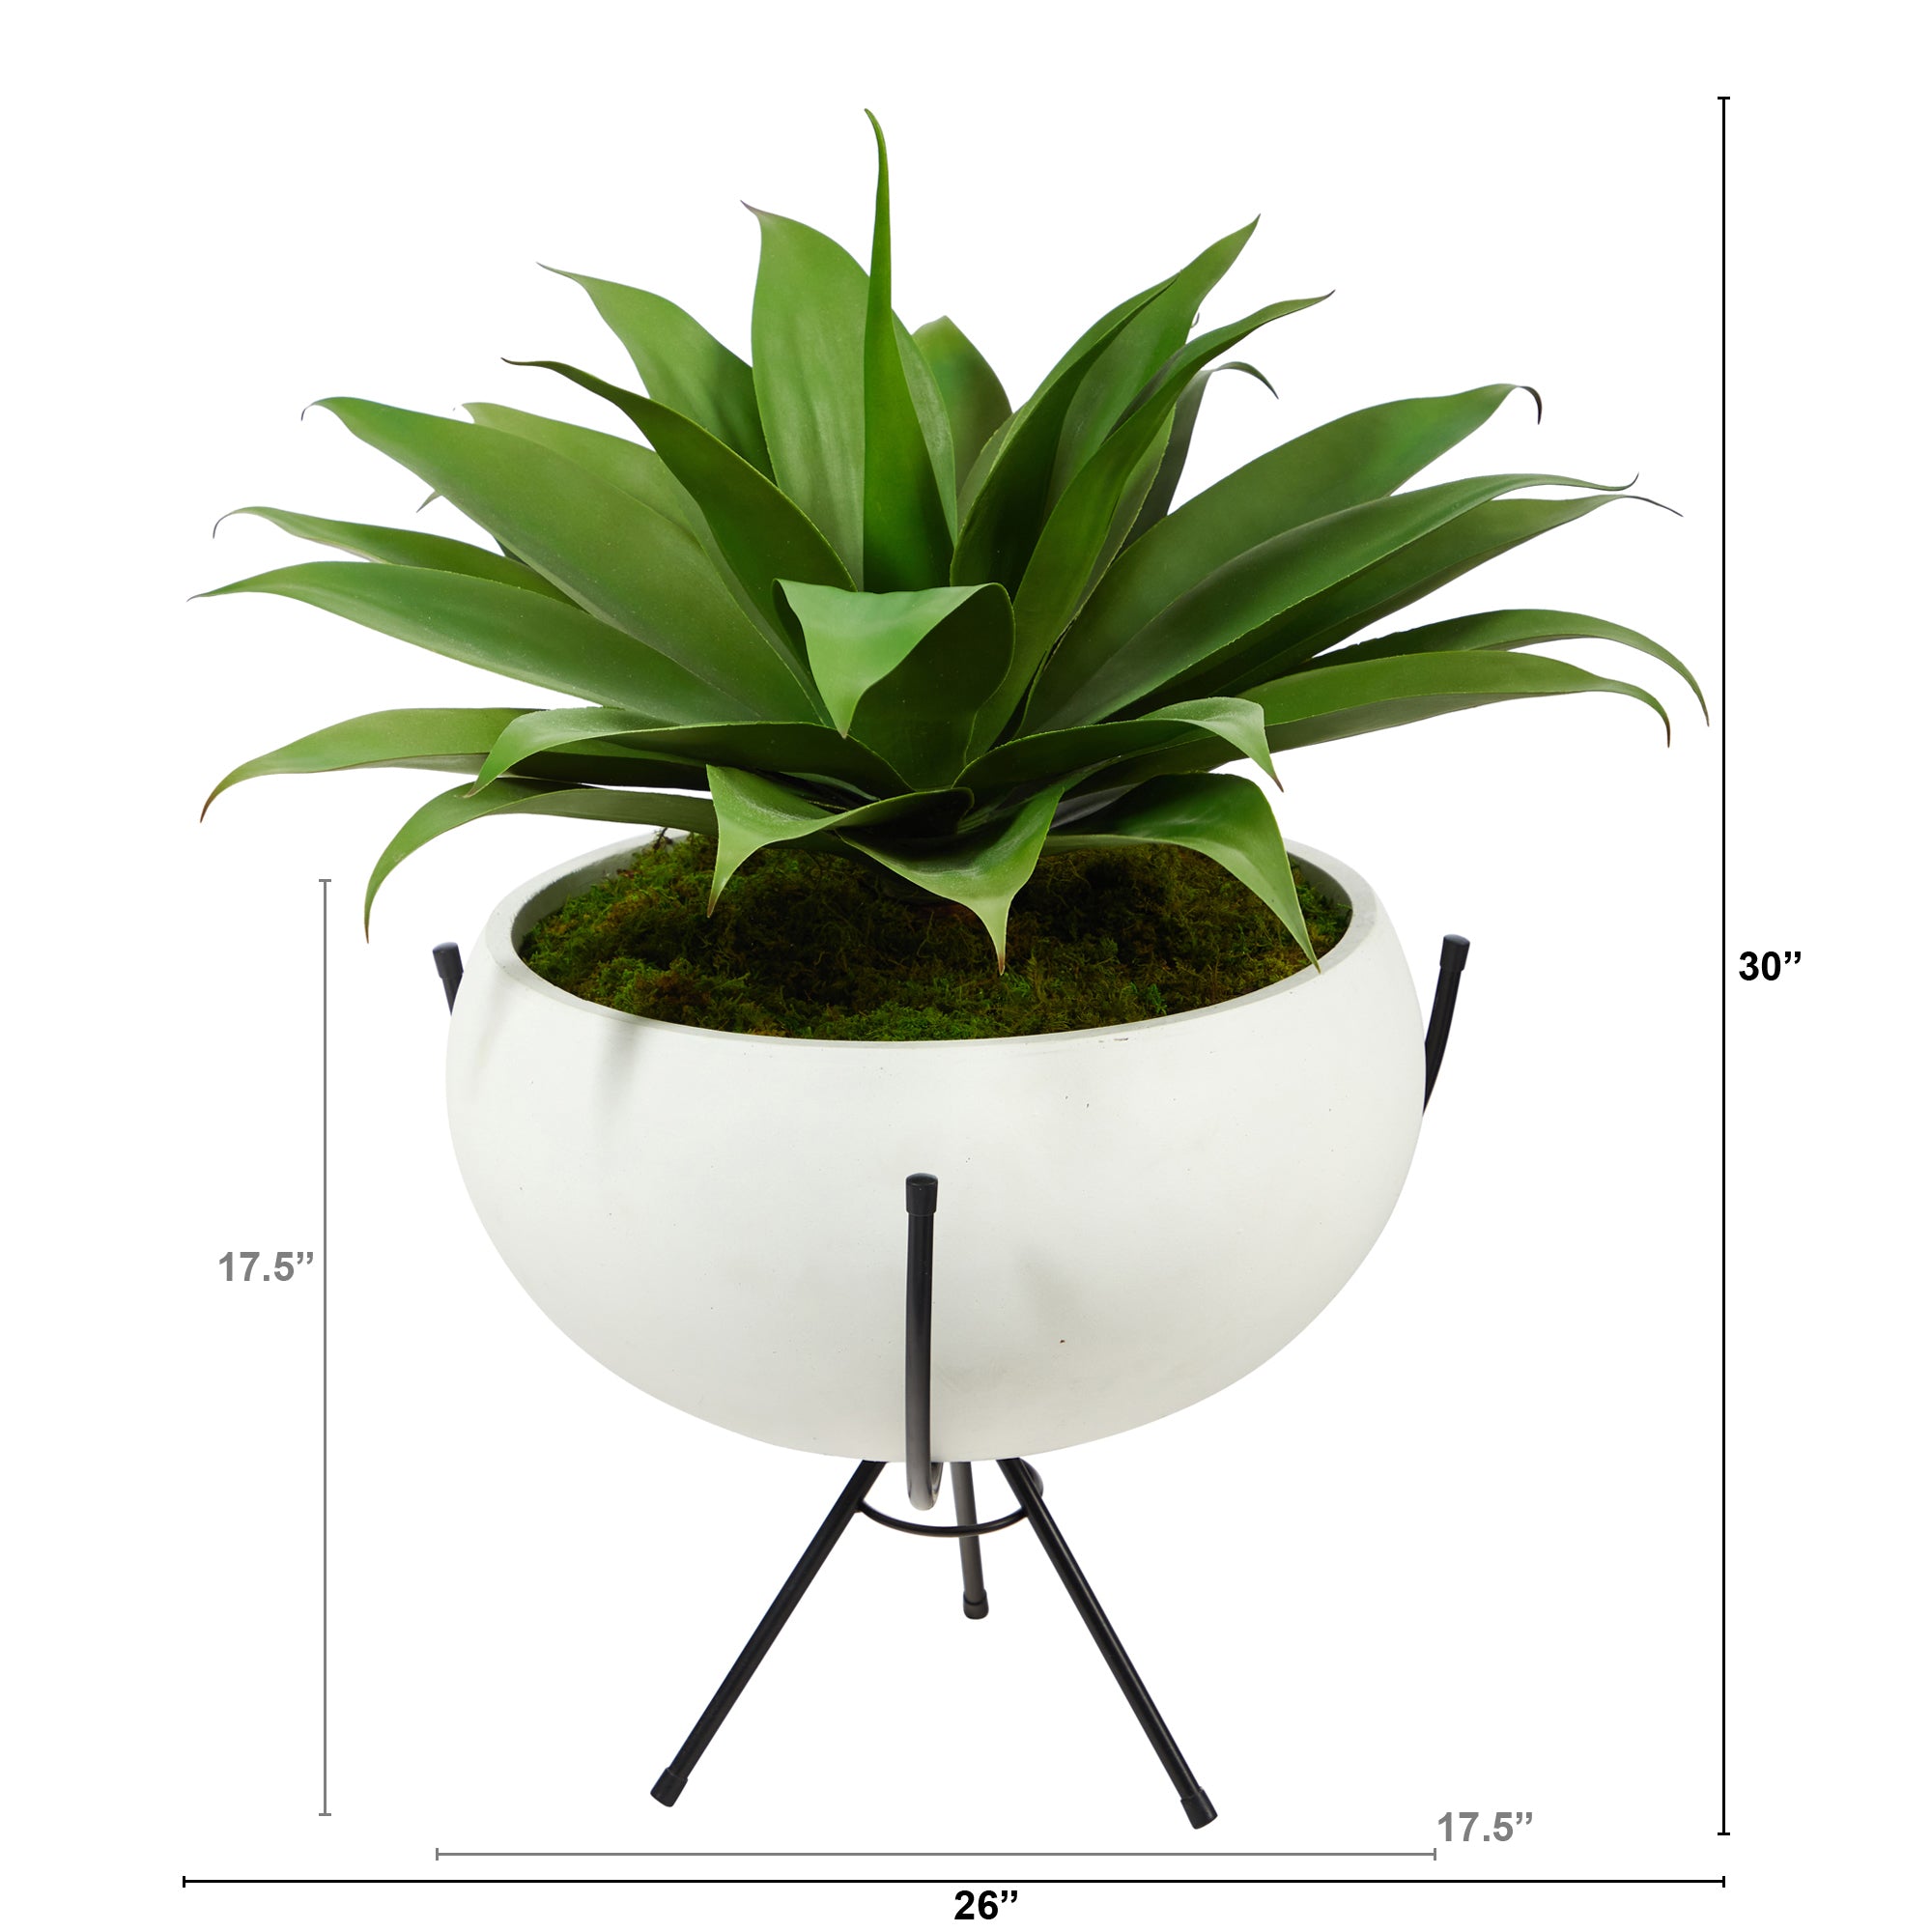 Agave Succulent Artificial Plant in White Planter with Metal Stand, 30”